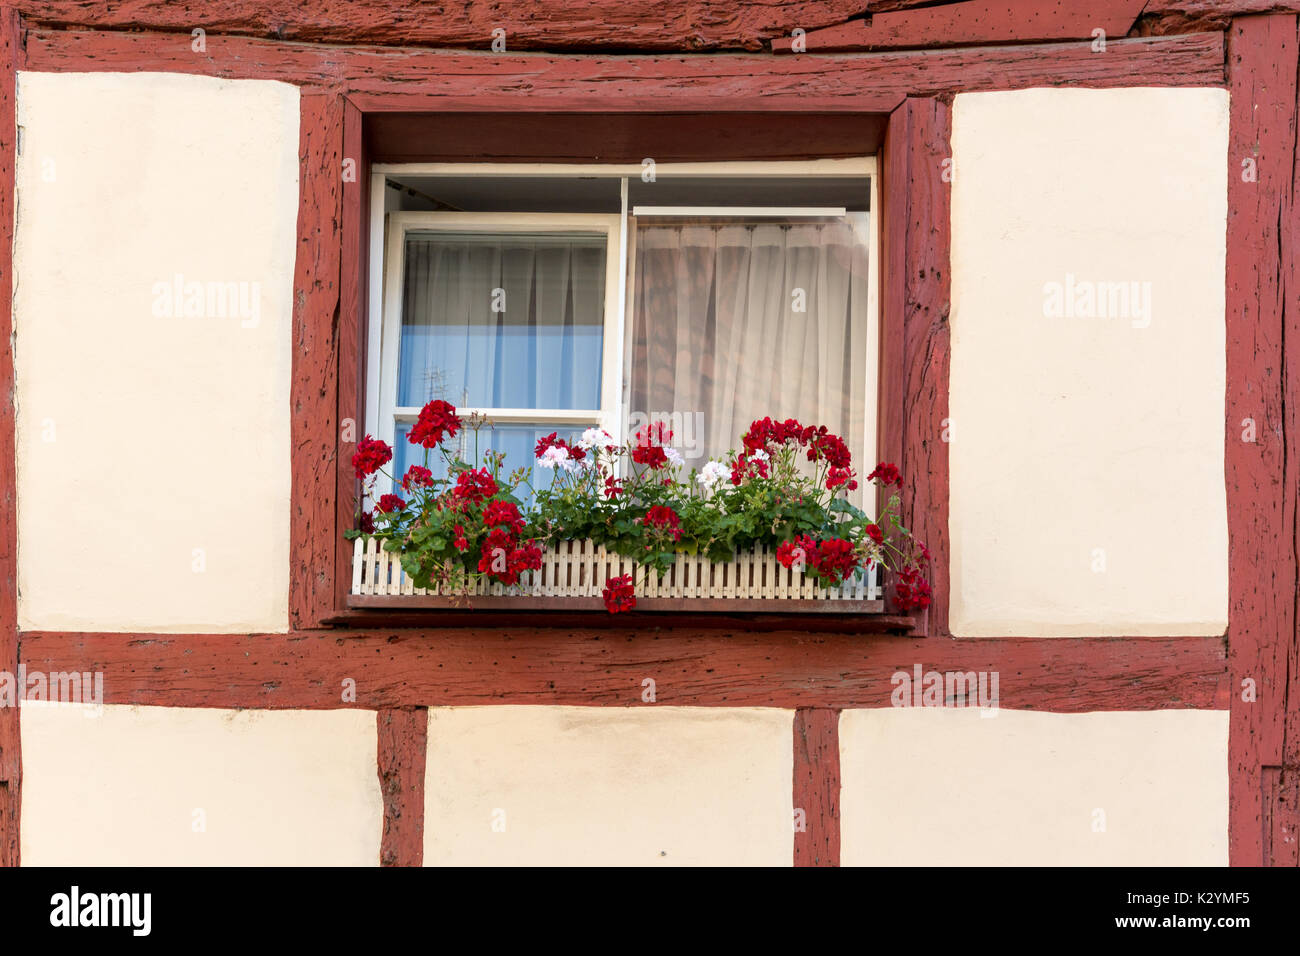 Half-timbered house with window shutters and colorful flowers Stock Photo